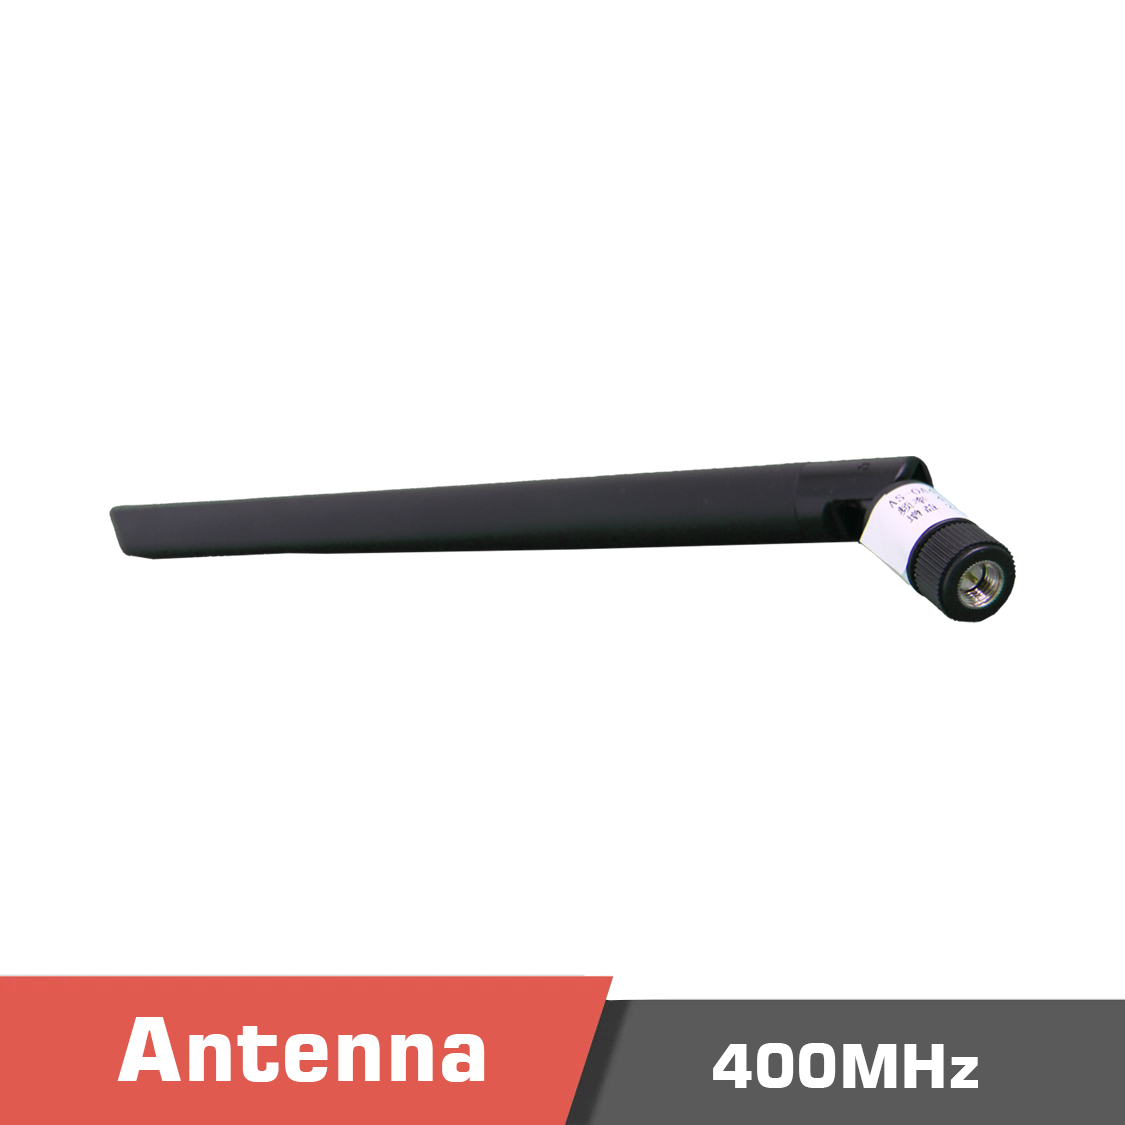 Dipole400 3 - hgv-906u,omnidirectional antenna,wireless lan,scada,lpwan/iot/m2m,wireless video links,900mhz,900mhz cellular band applications,800mhz,ism band,long-range data link,long-range antenna,long-range video link,telemetry,unmanned aerial vehicle,panel antenna,automatic antenna tracker,aat,fiberglass antenna mast,6dbi omnidirectional antenna - motionew - 1